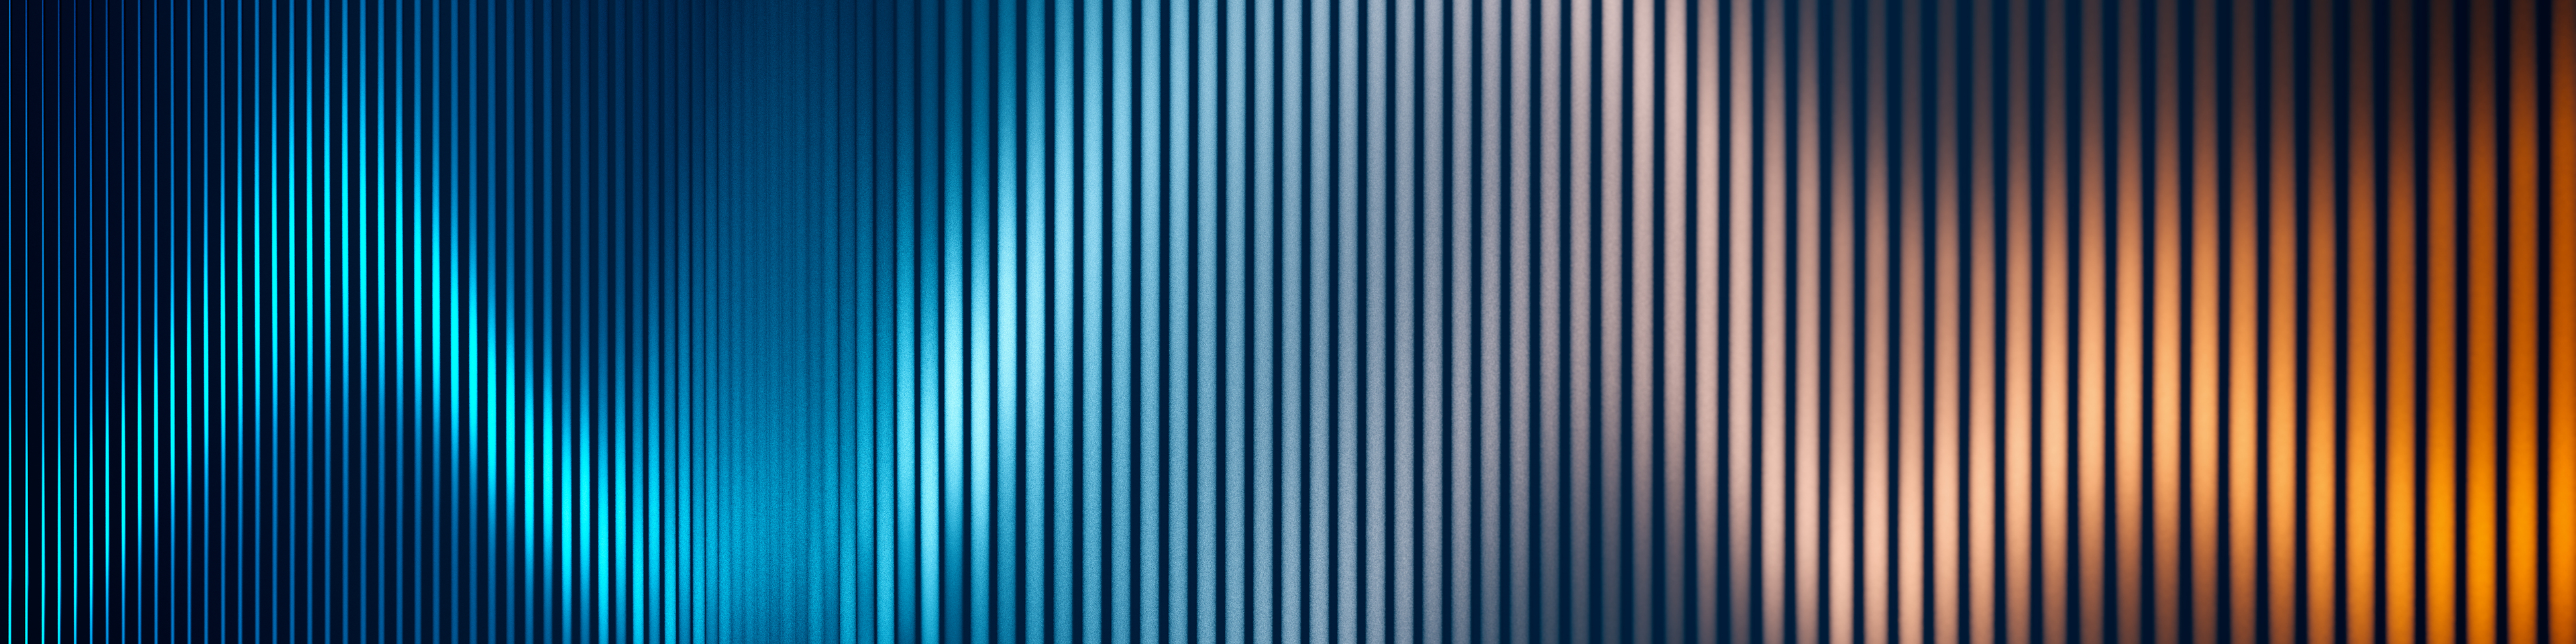 Abstract sound wave background